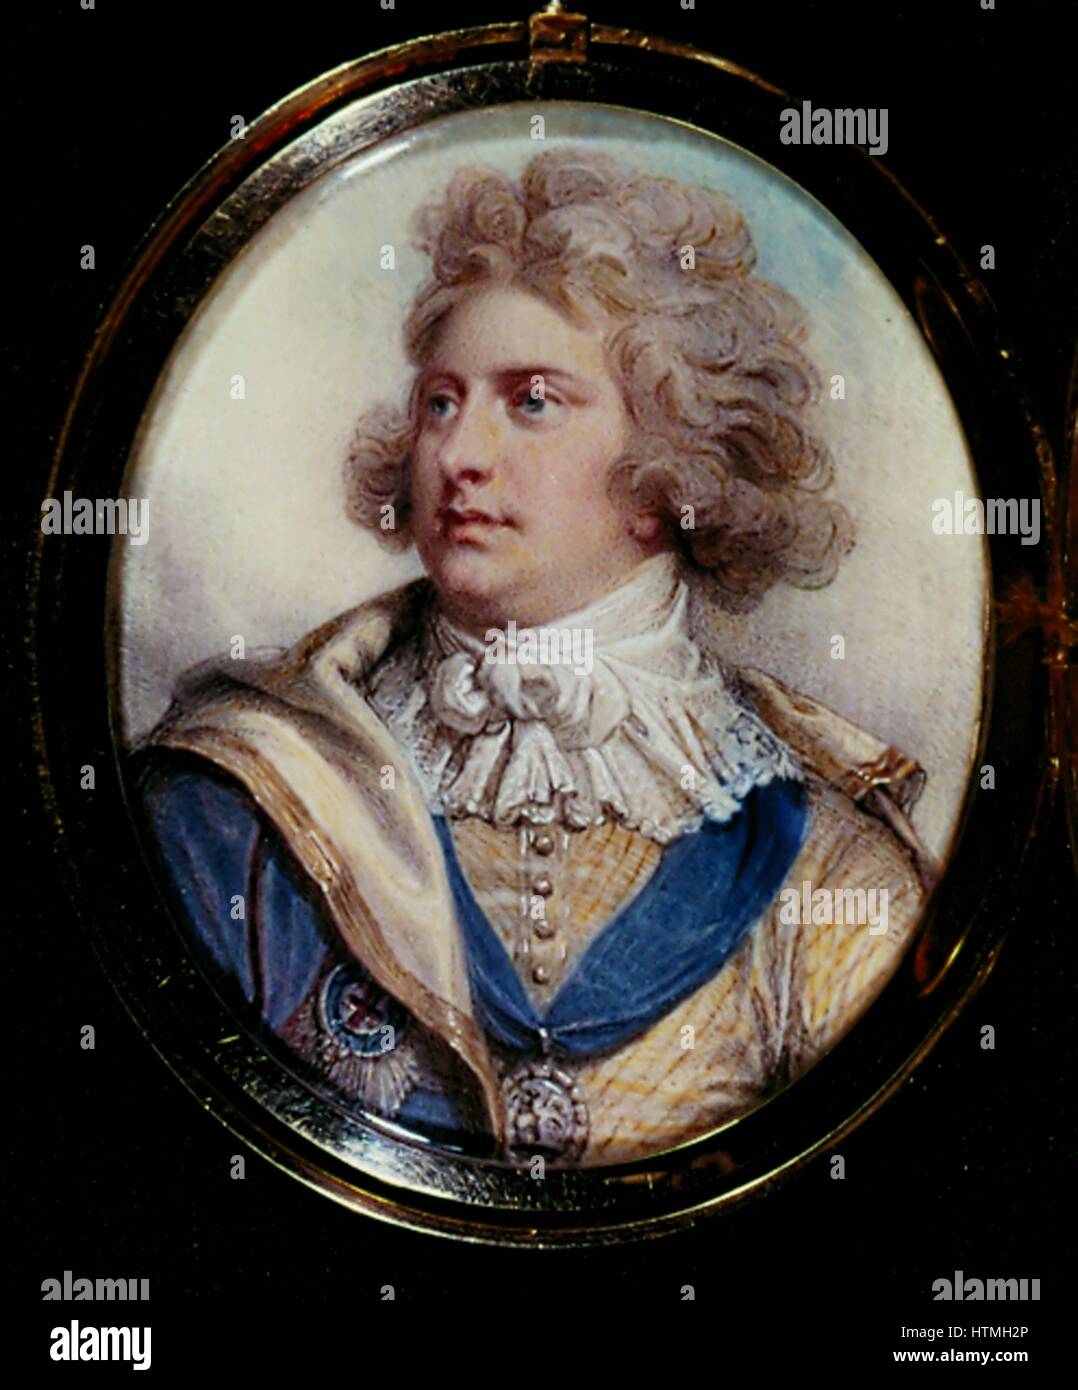 George IV (1672-1830) King of Great Britain from 1820 on the death of his father, George III. He had served as Prince Regent since 1811 during his father's illness. George in 1792 when Prince of Wales. Portrait by Richard Cosway. Stock Photo